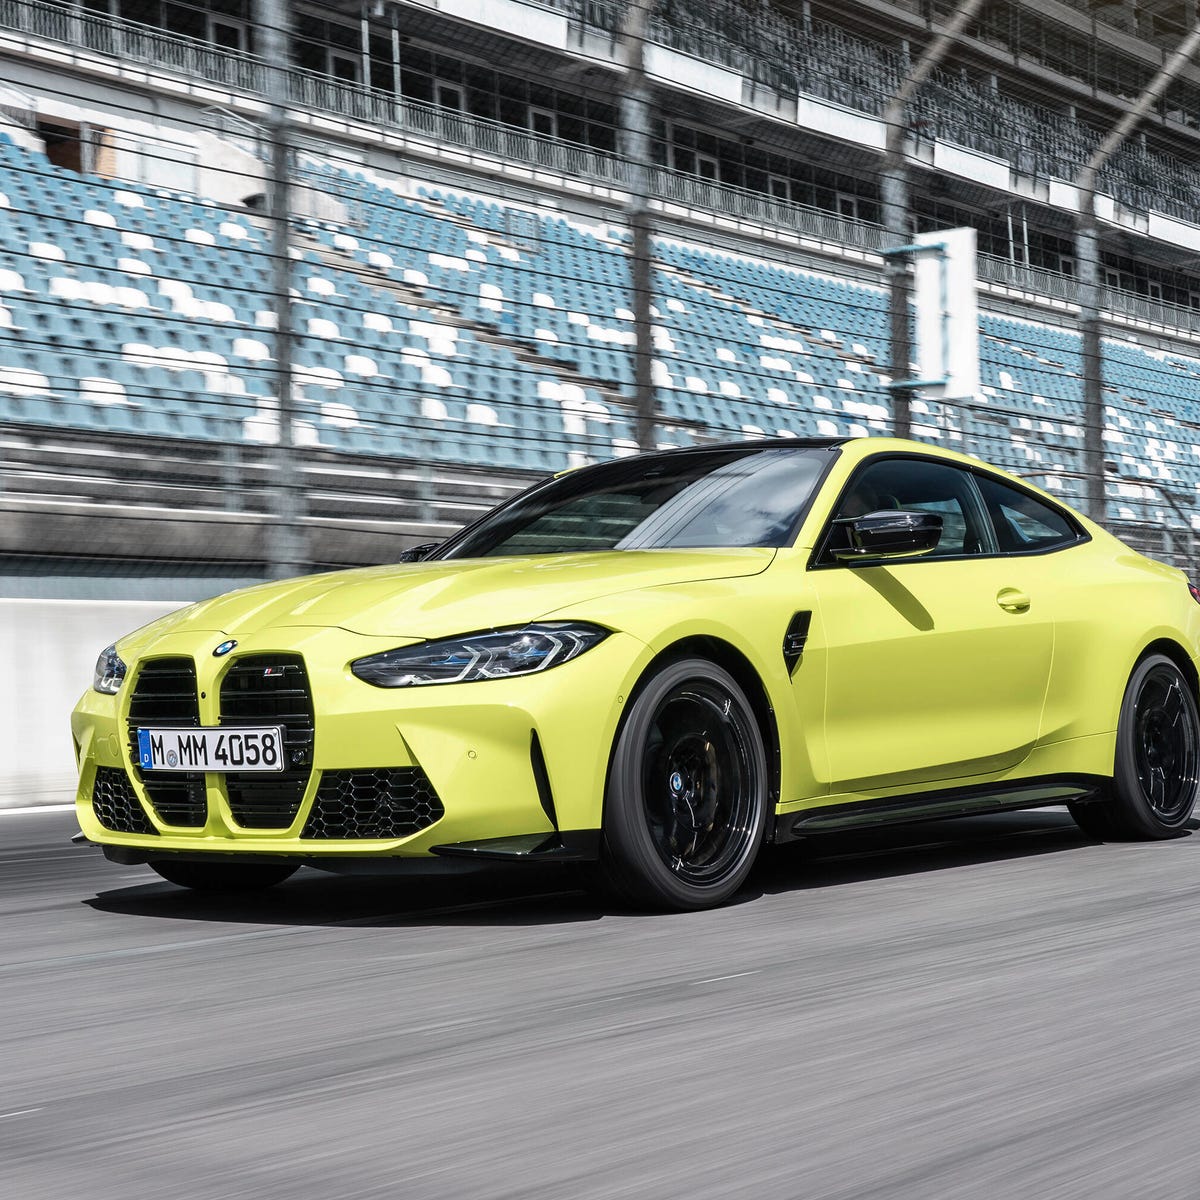 The 2021 Bmw M4 Coupe Has That Big Grille And Craziest Seats I Ve Ever Seen Cnet